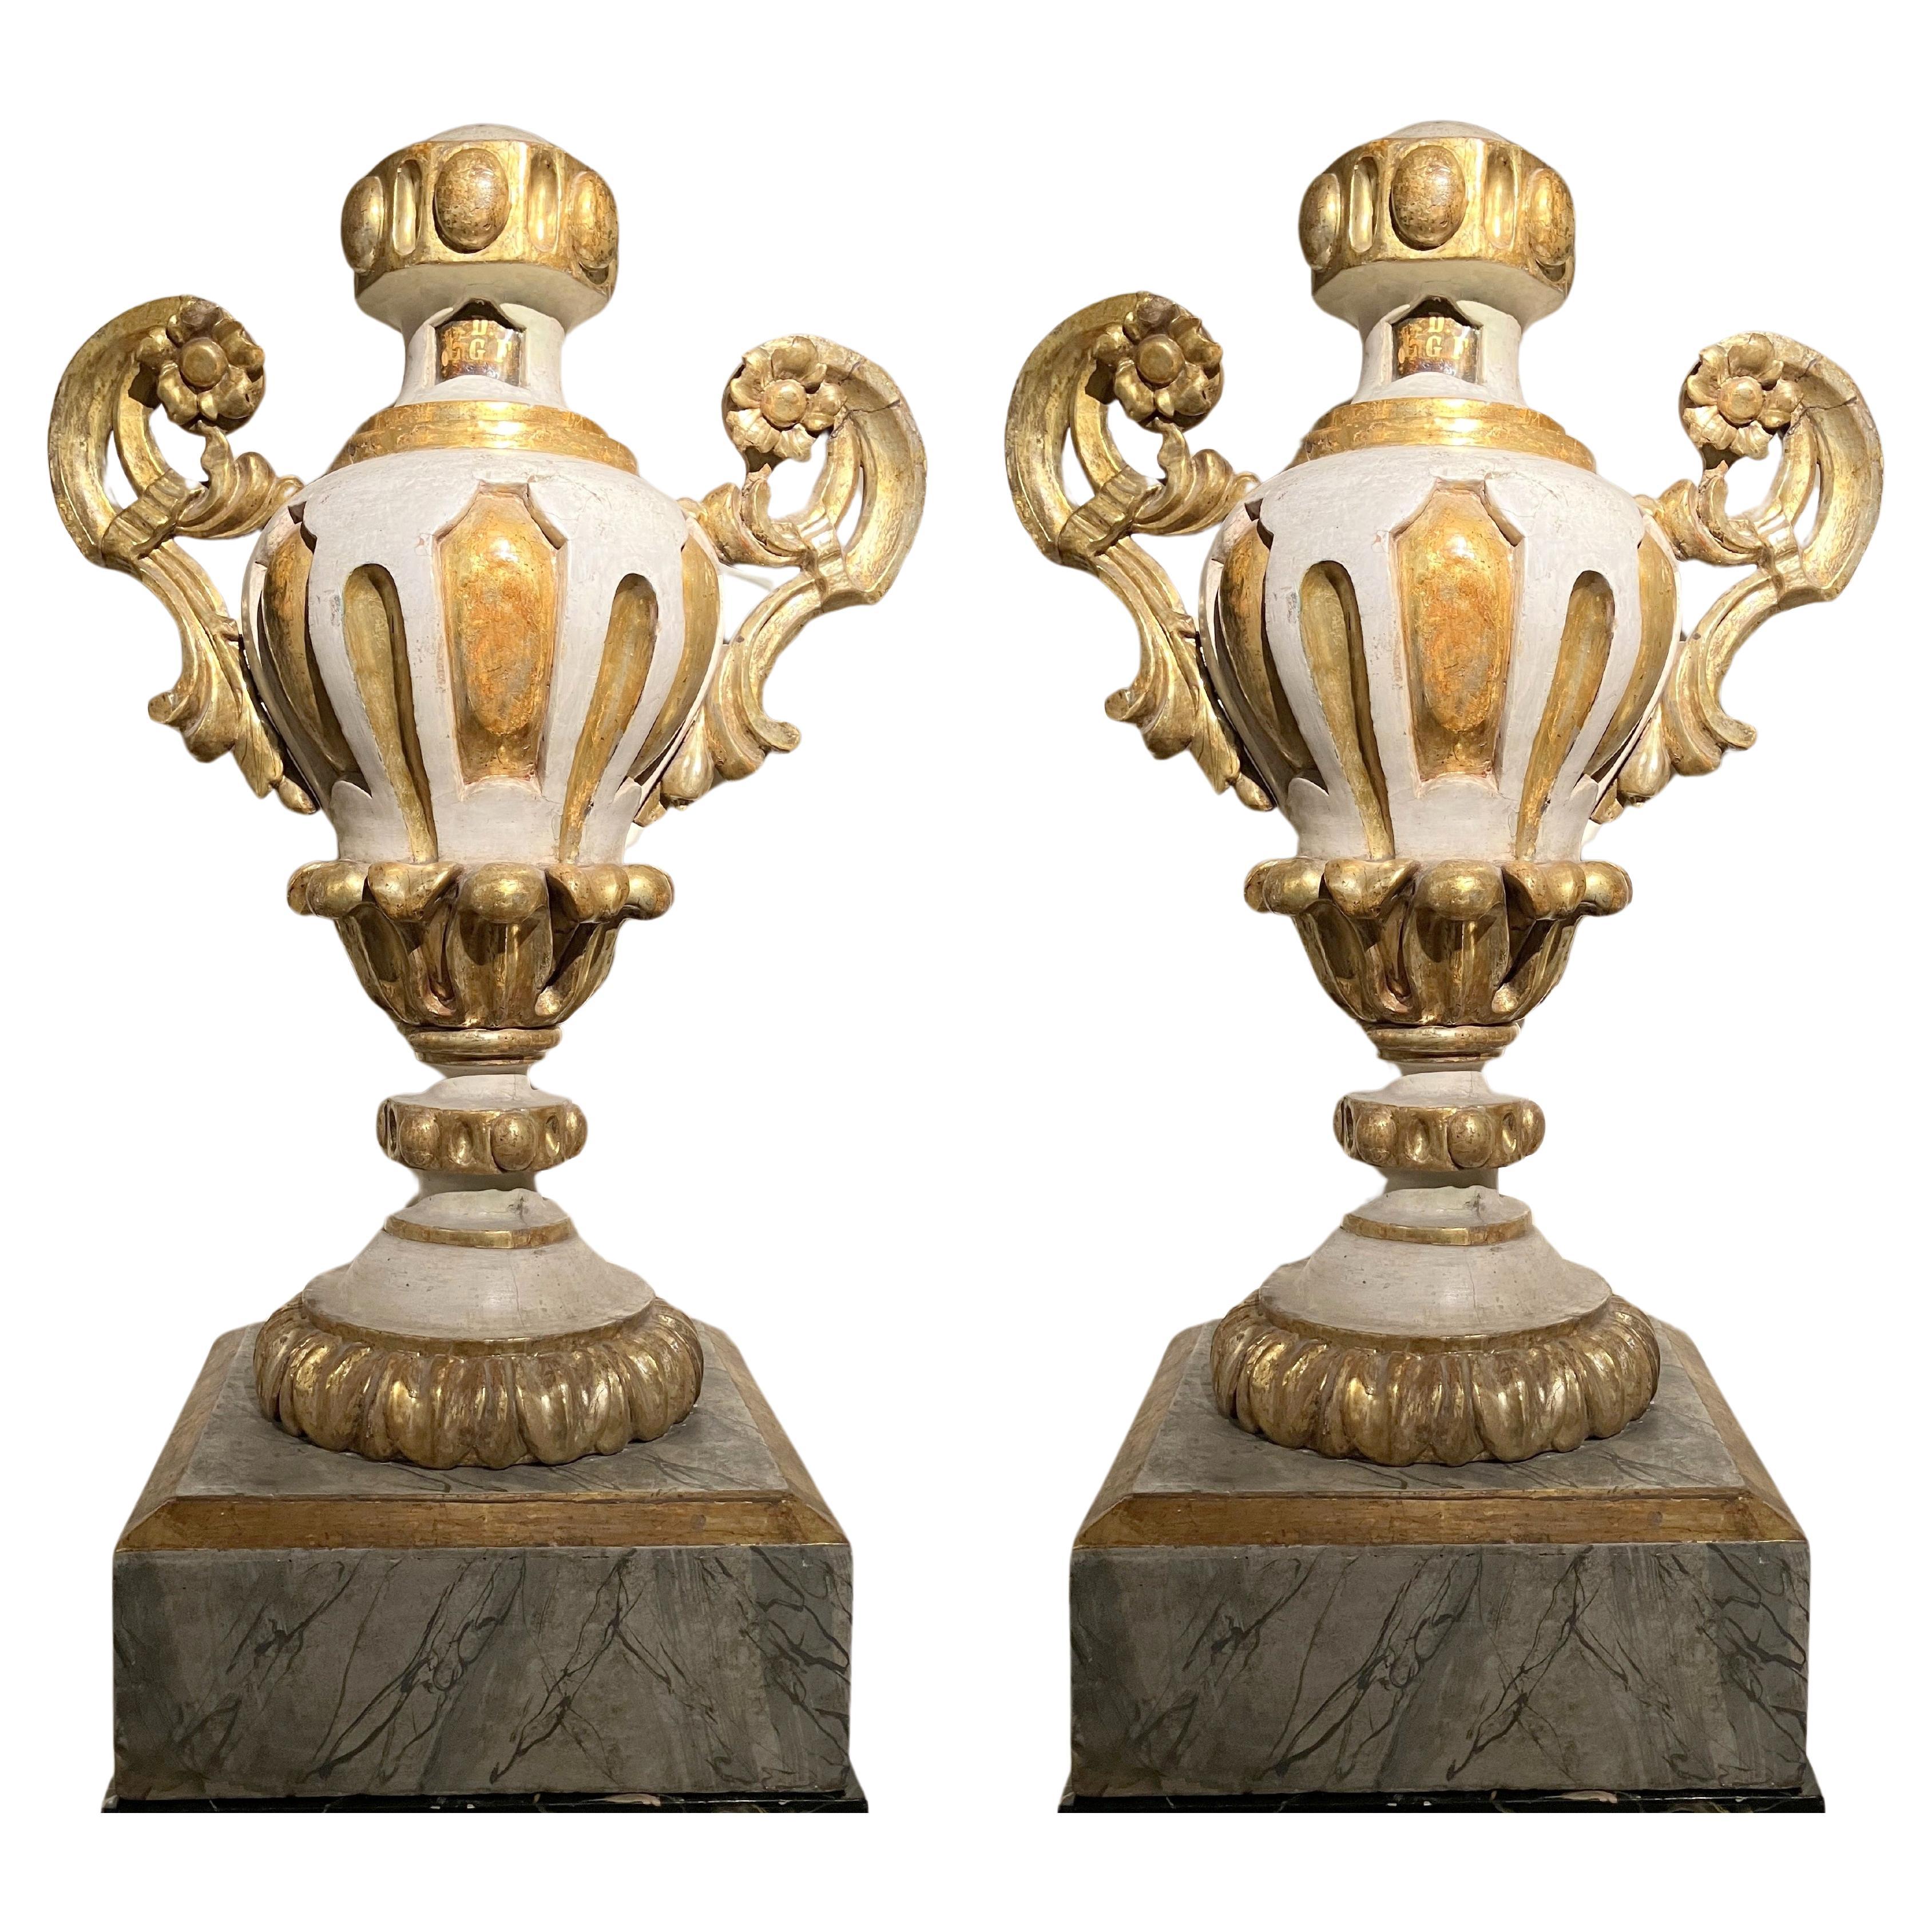 Italian Antiques Louis XIV Urn Lacquer and Gilt Vases For Sale